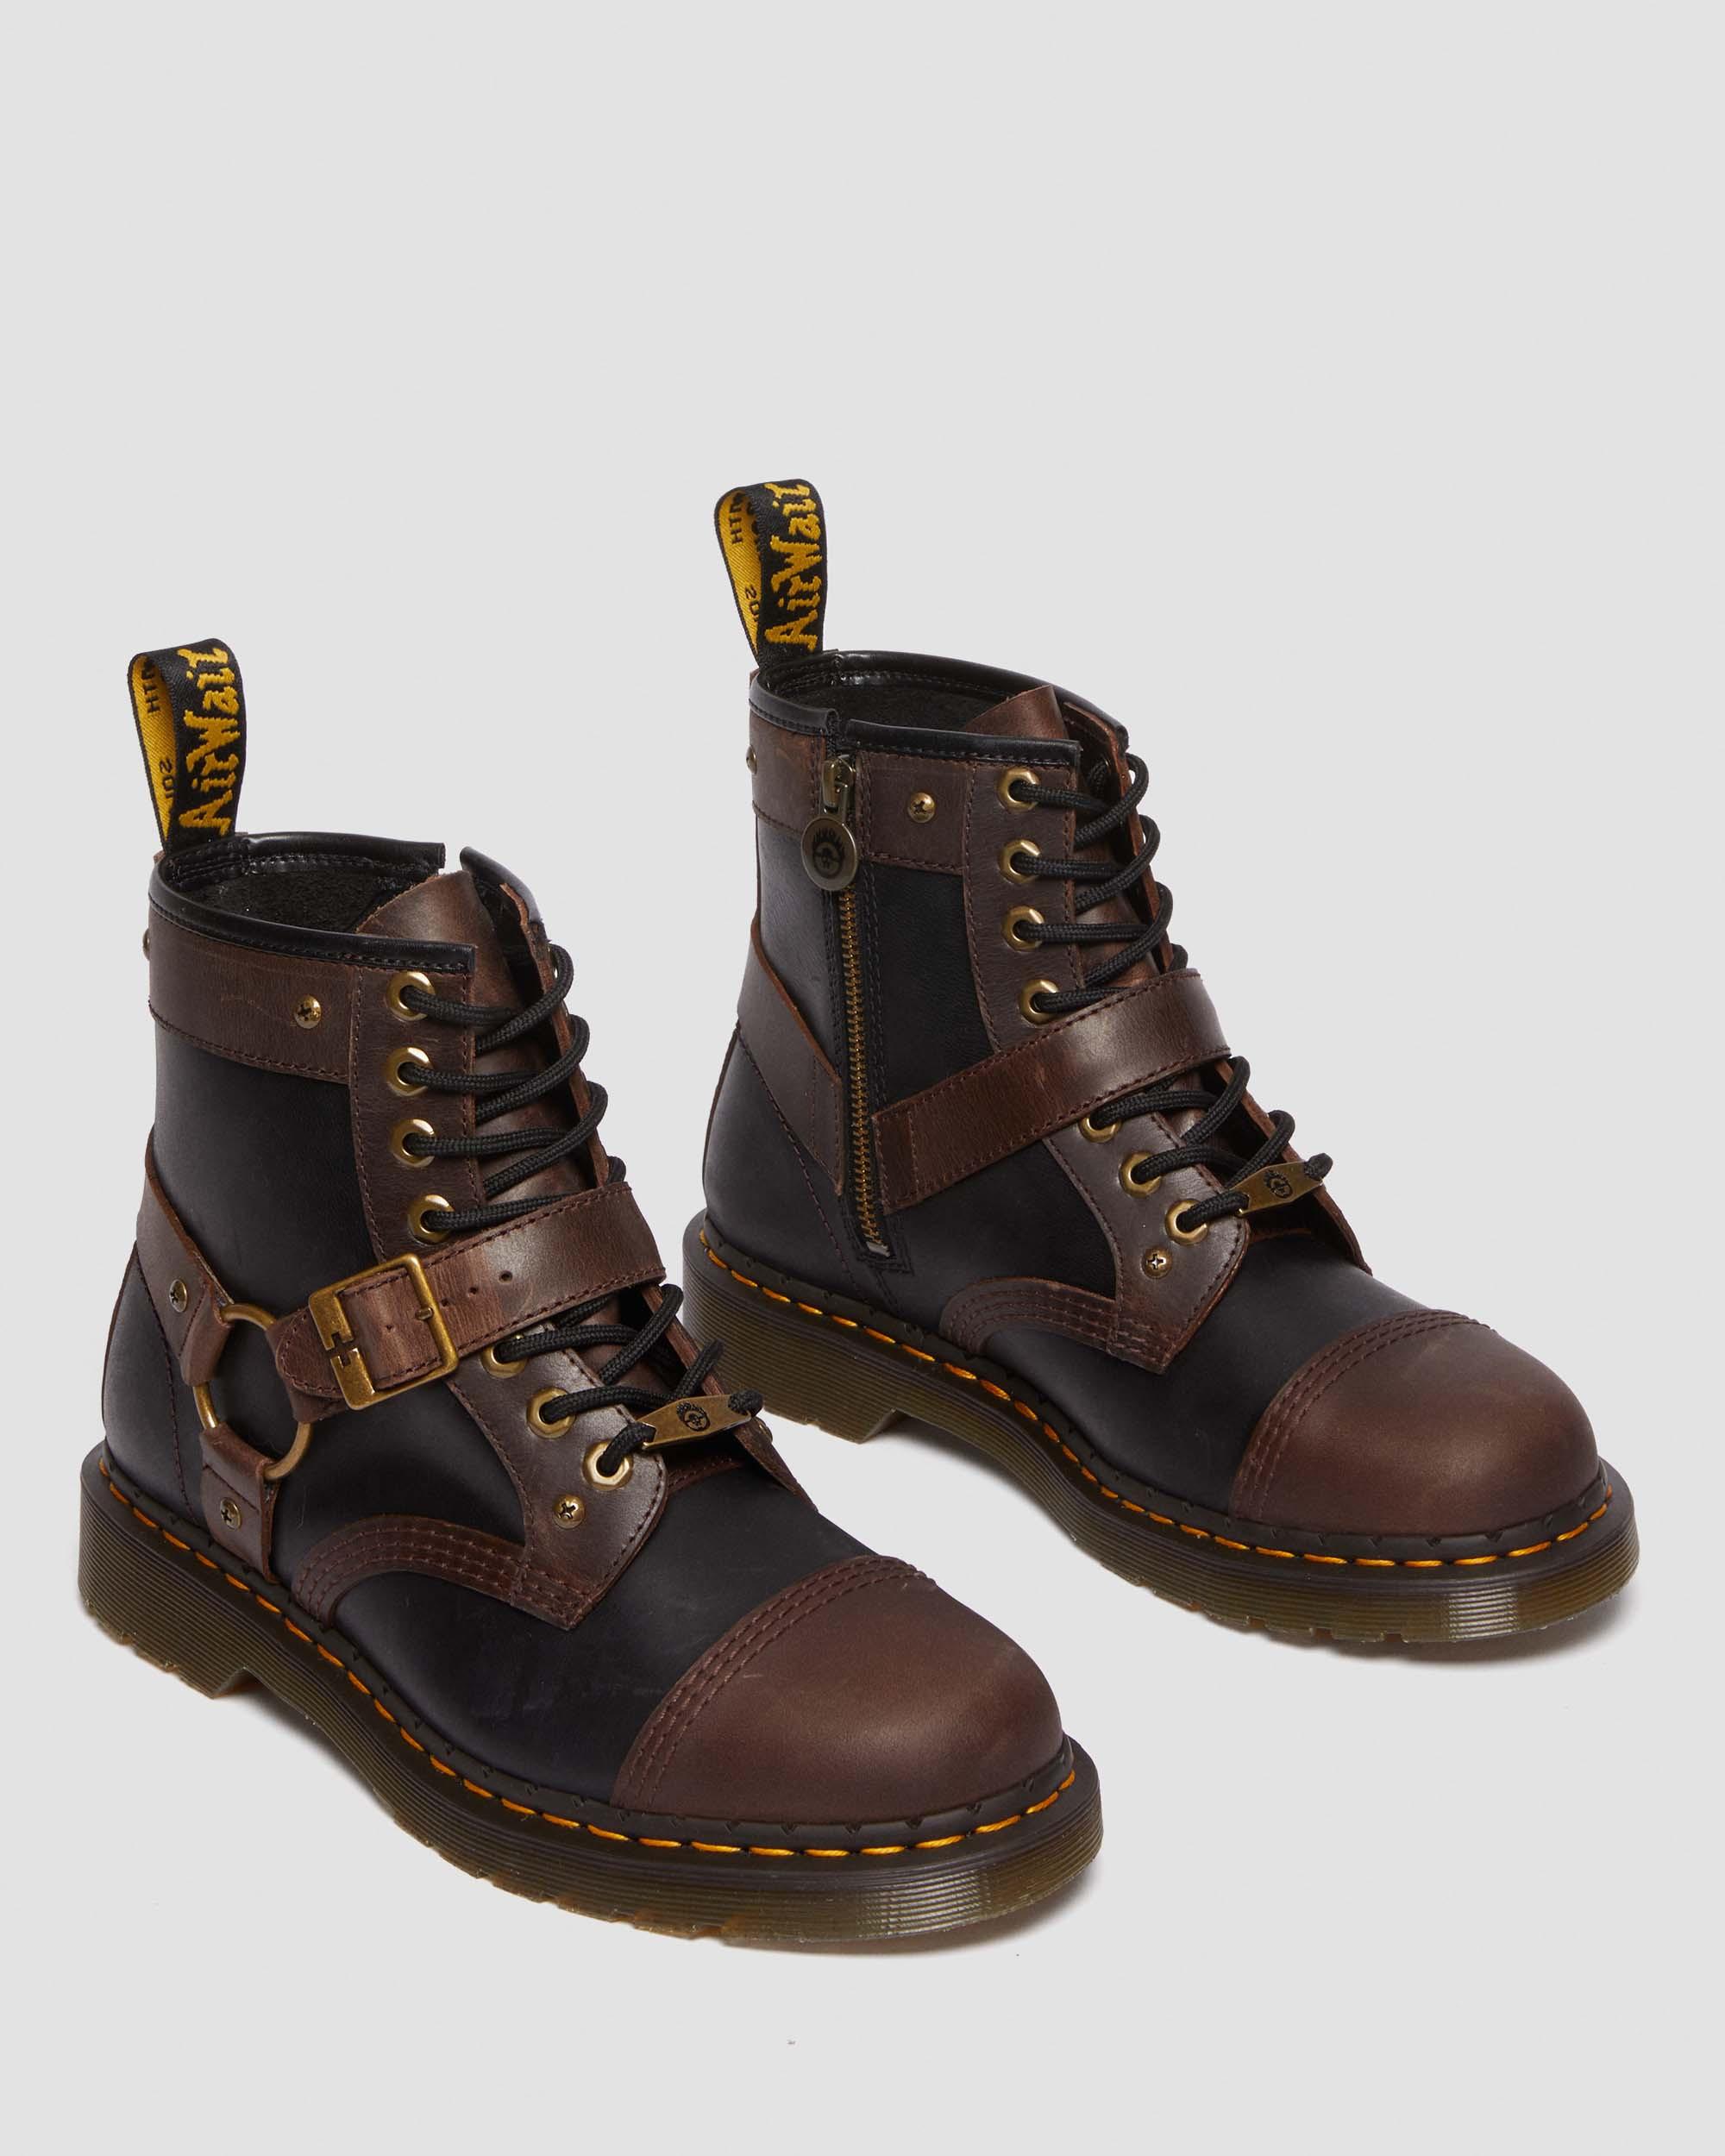 1460 Mad Max Leather Boots in Black+Brown